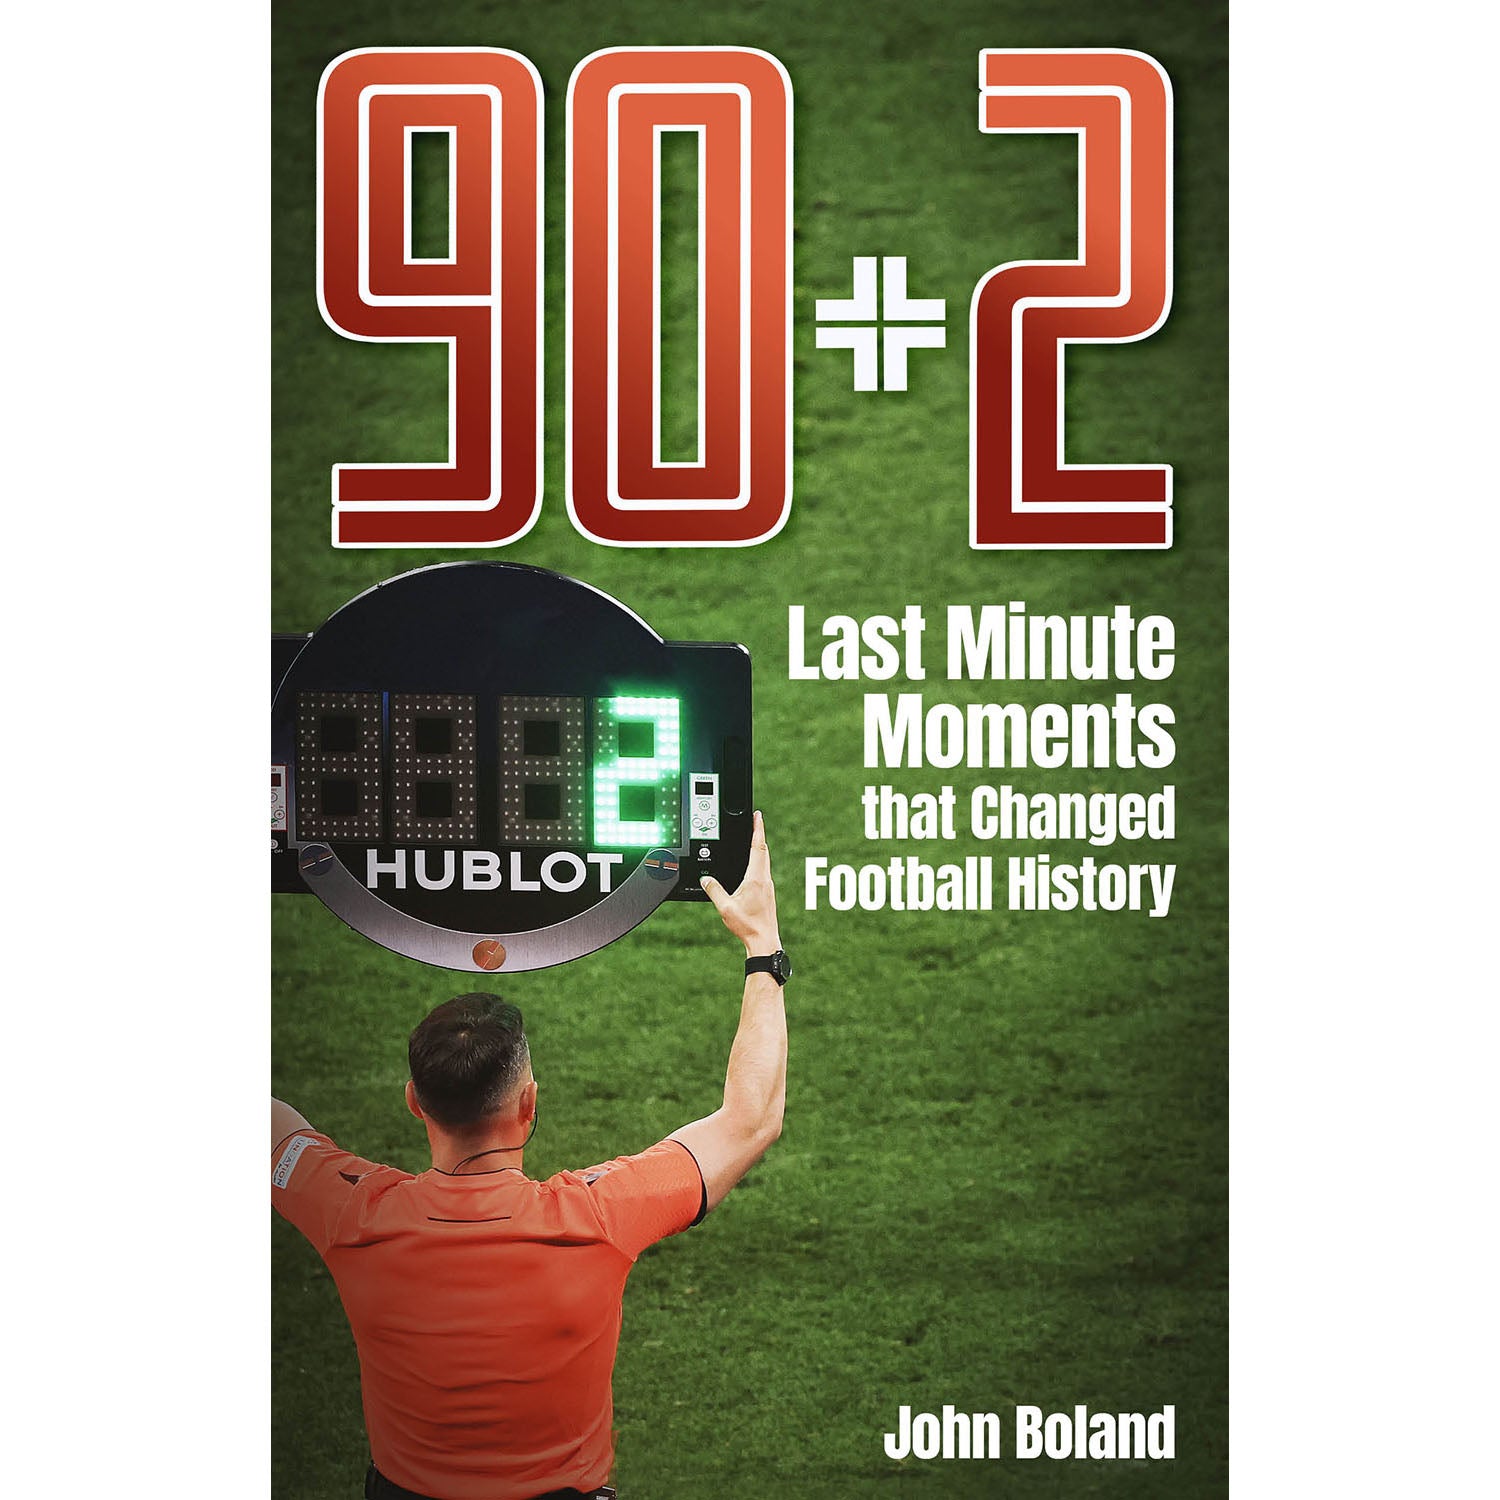 90+2 – Last Minute Moments that Changed Football History